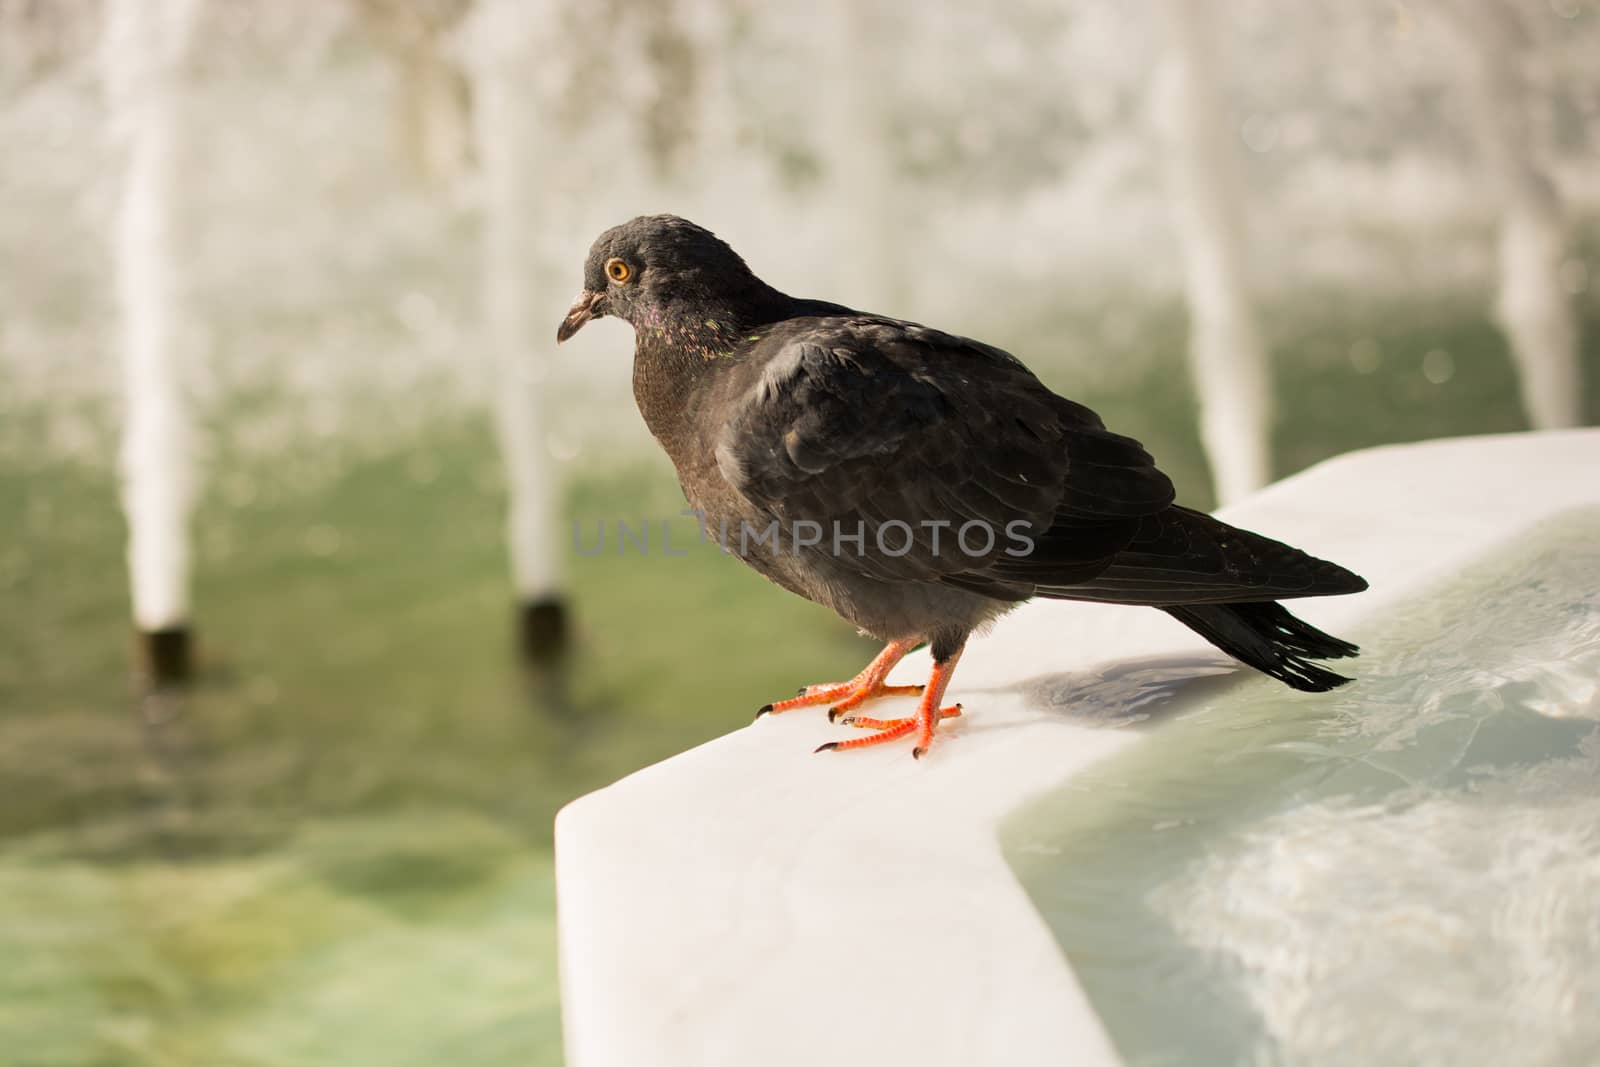 Lonely bird by the fountain lives in urban environment by berkay